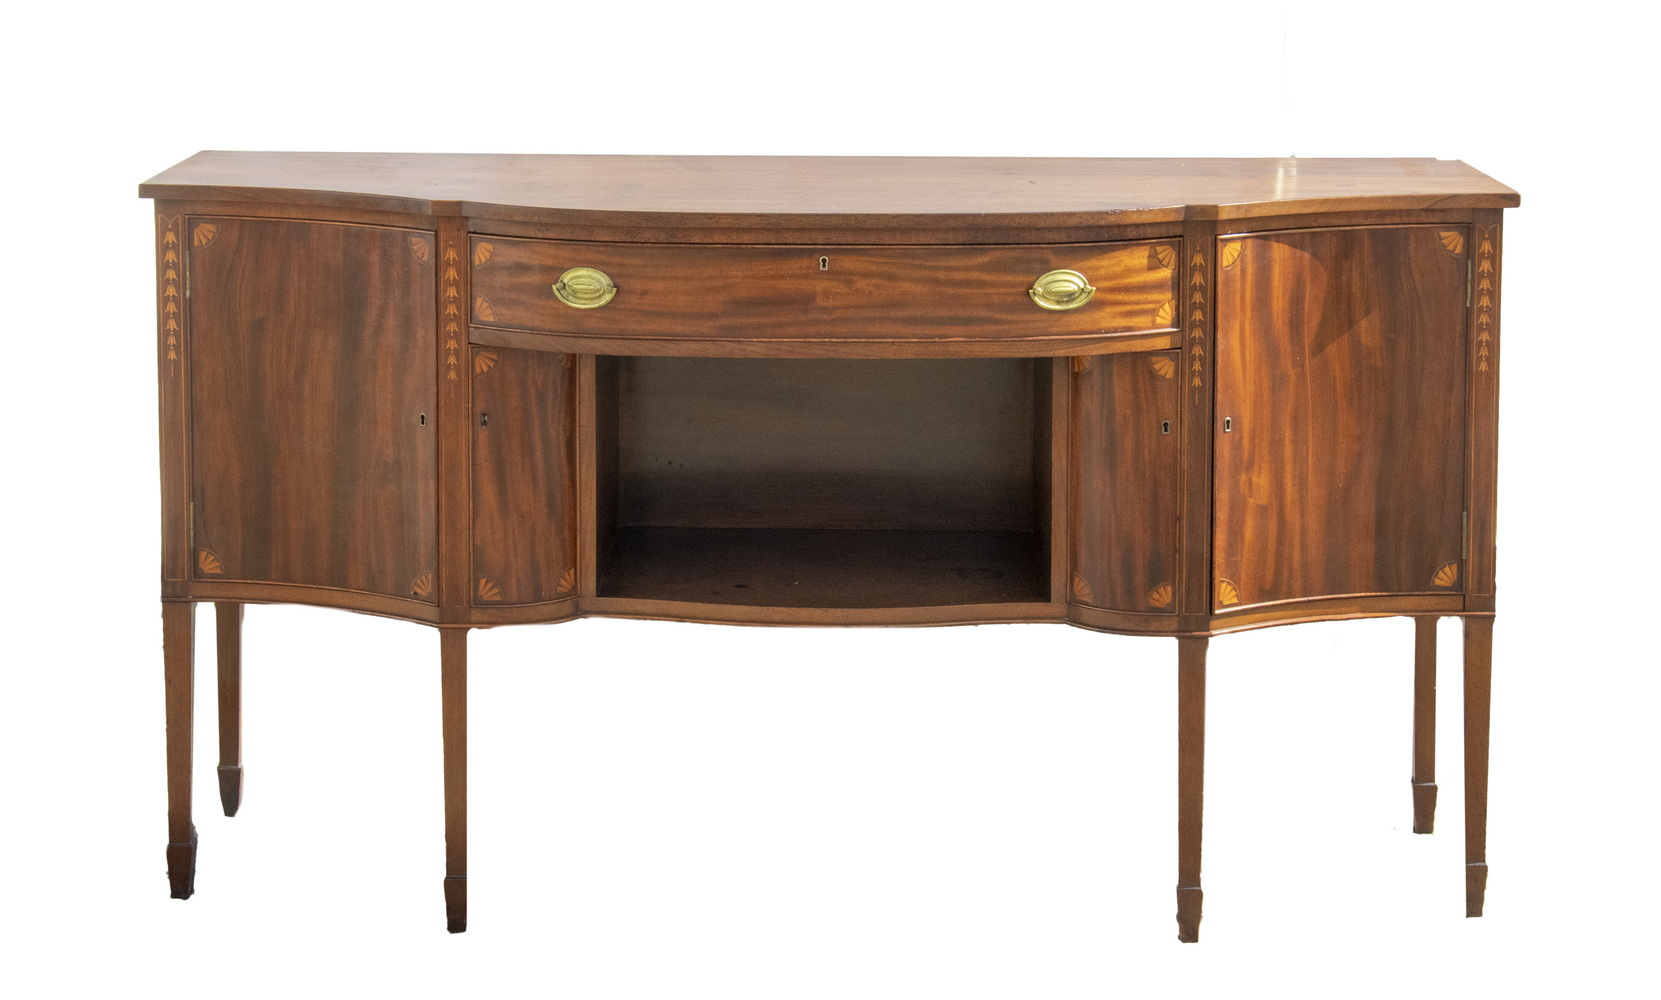 MAHOGANY SIDEBOARD WITH MARQUETRY 33dd6c